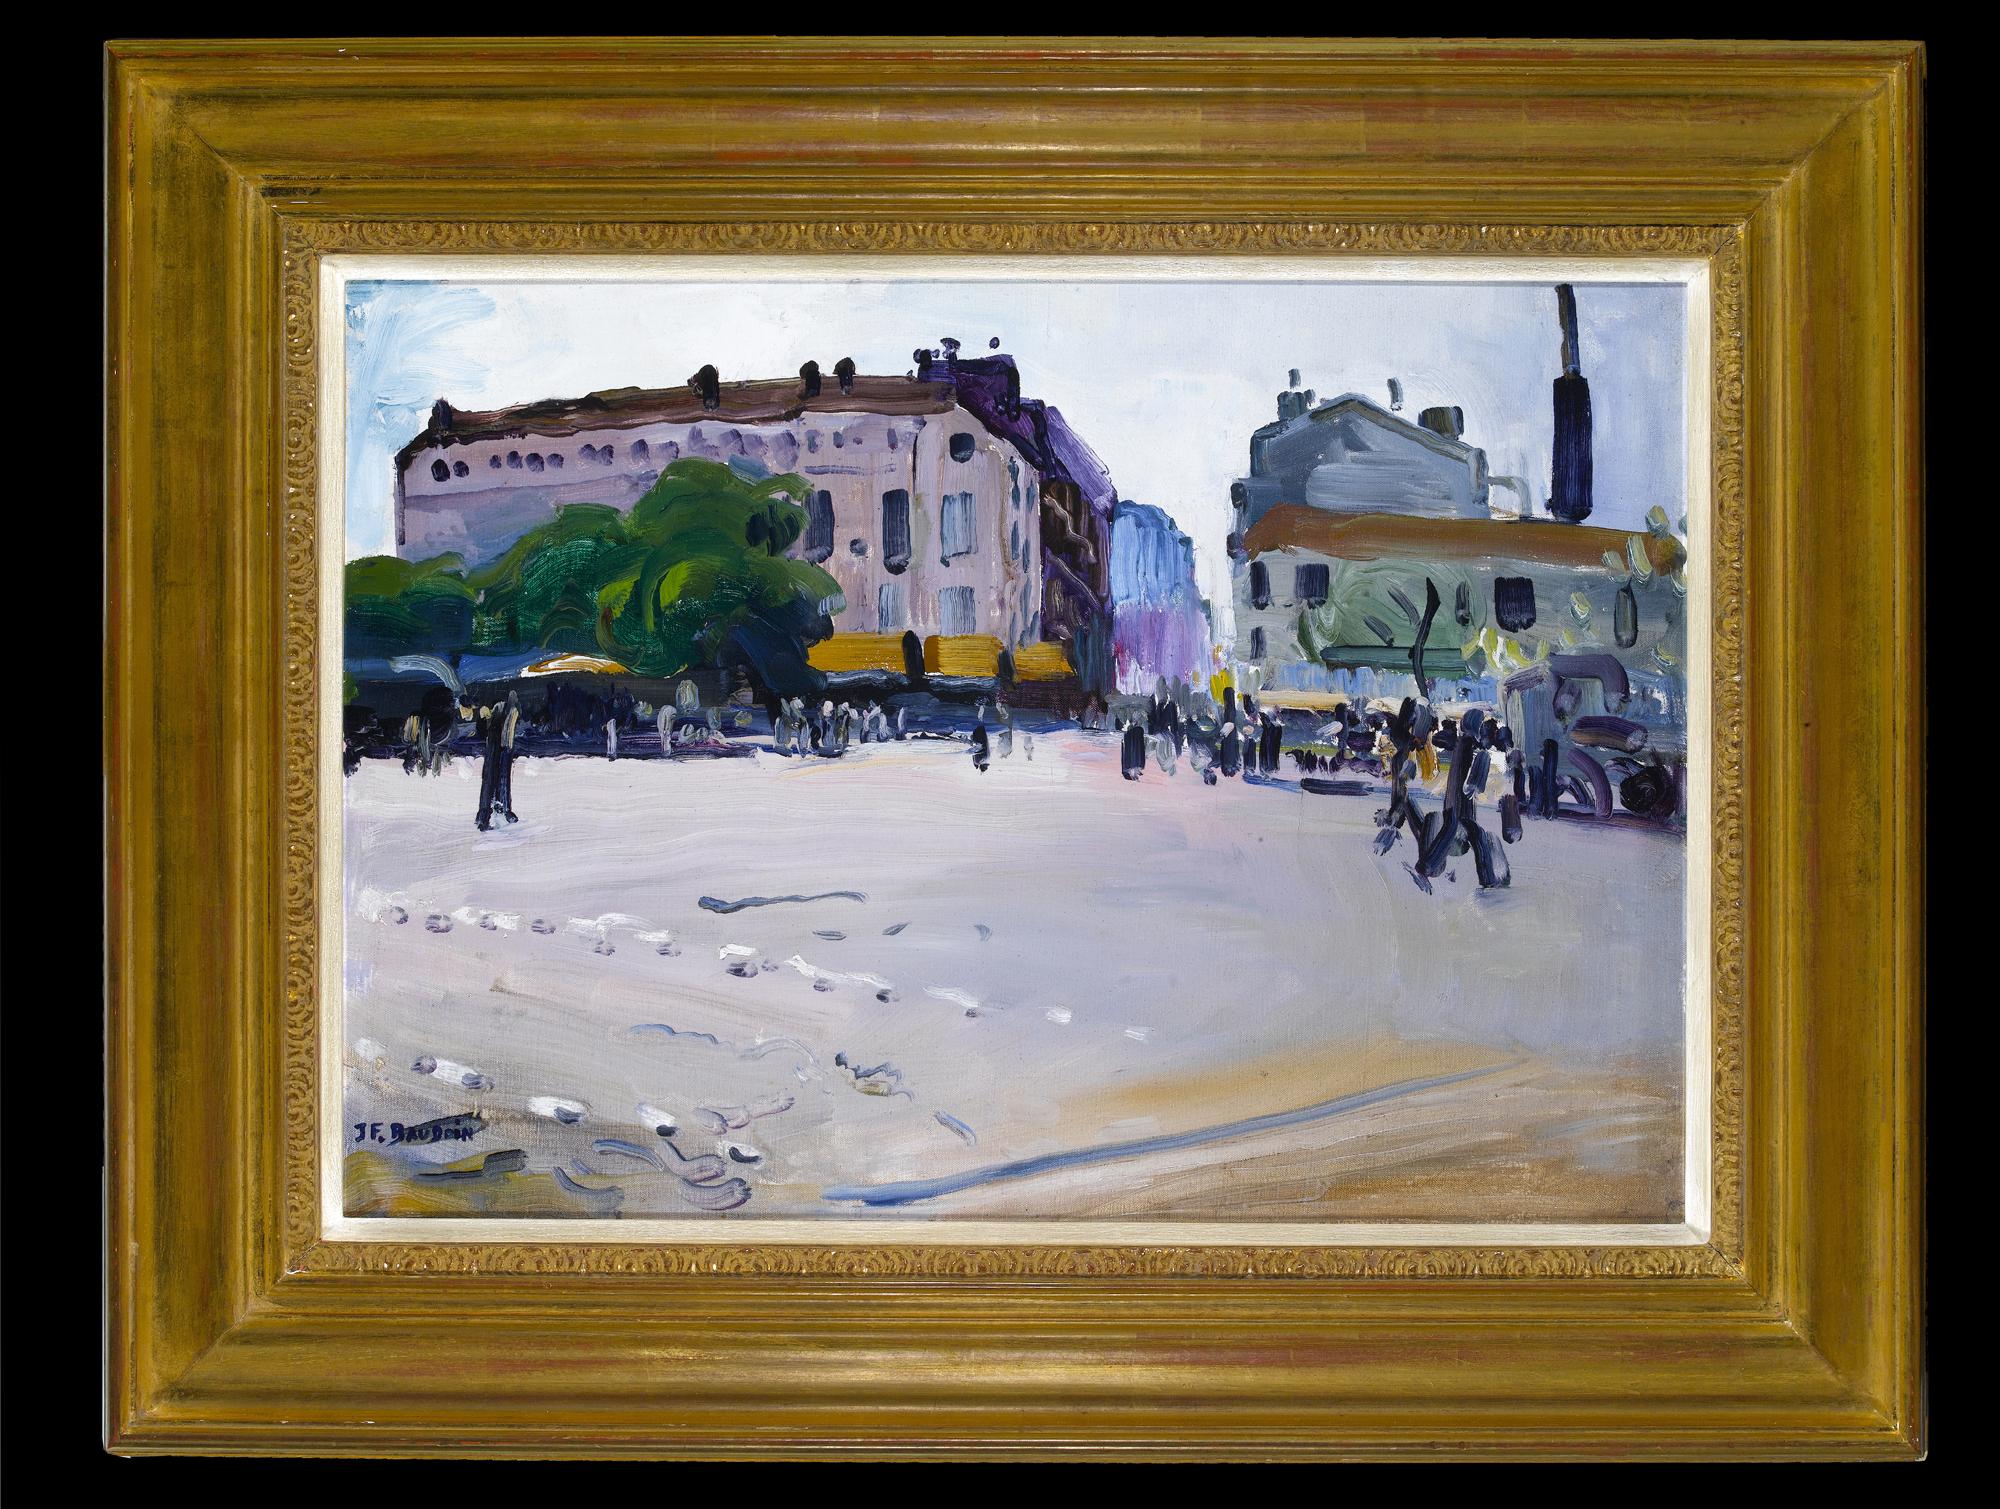 'Place de la Bataille' Busy French Paris Street Scene with Figures, Buildings  - Painting by Jean Franck Baudoin